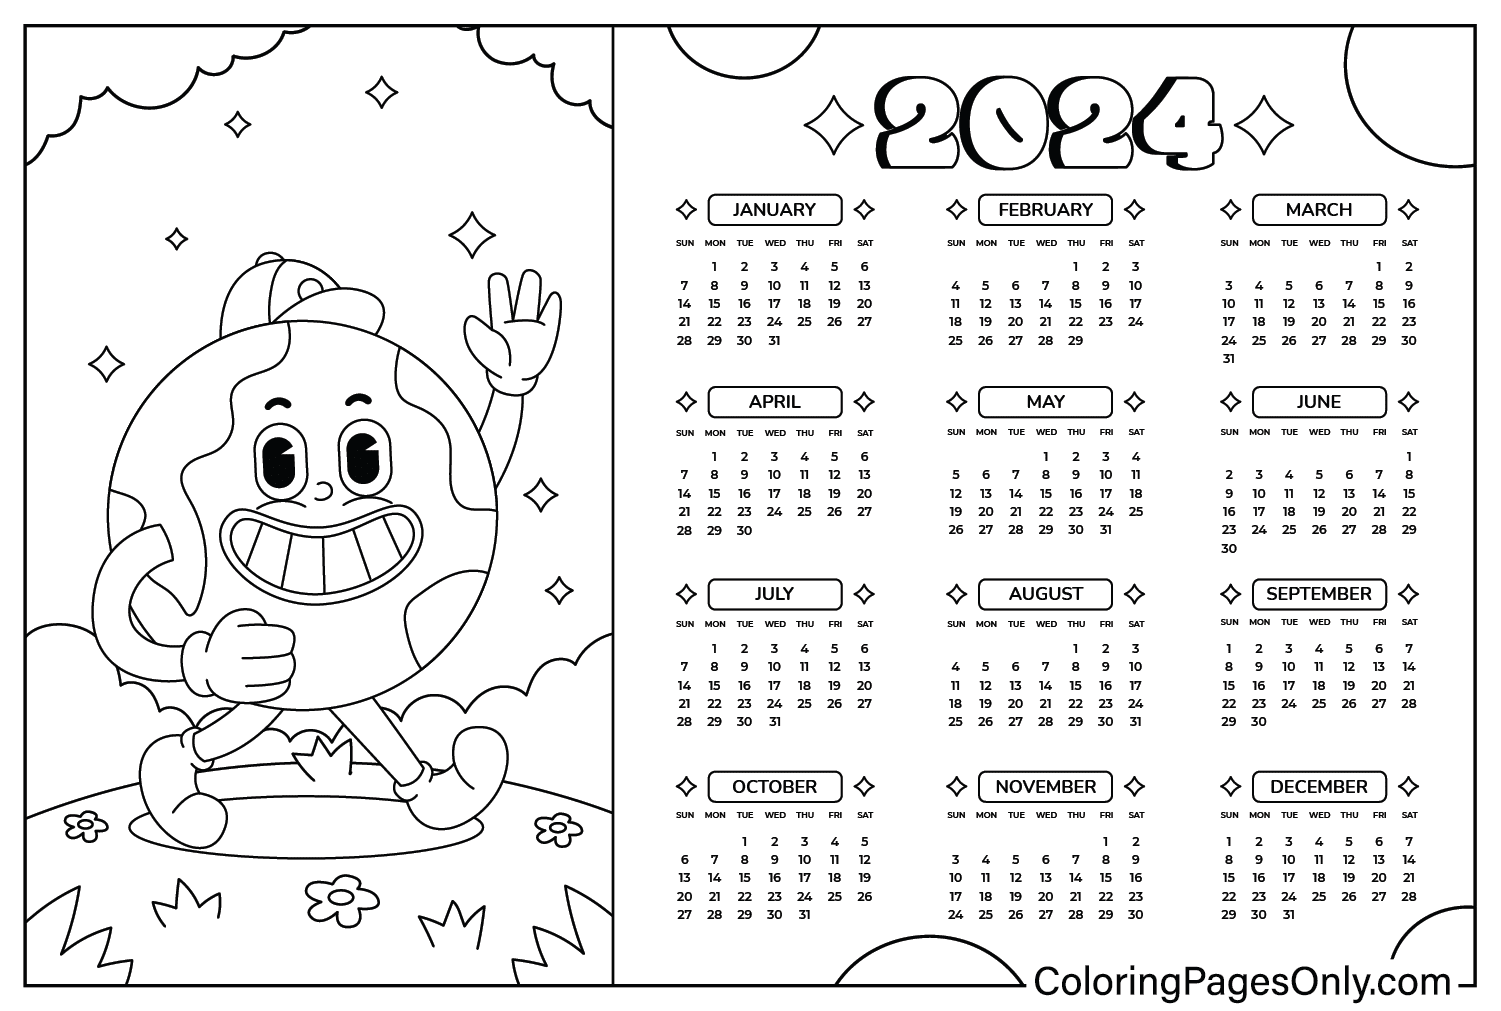 Calendar 2024 Coloring Page for Adults Free Printable Coloring Pages